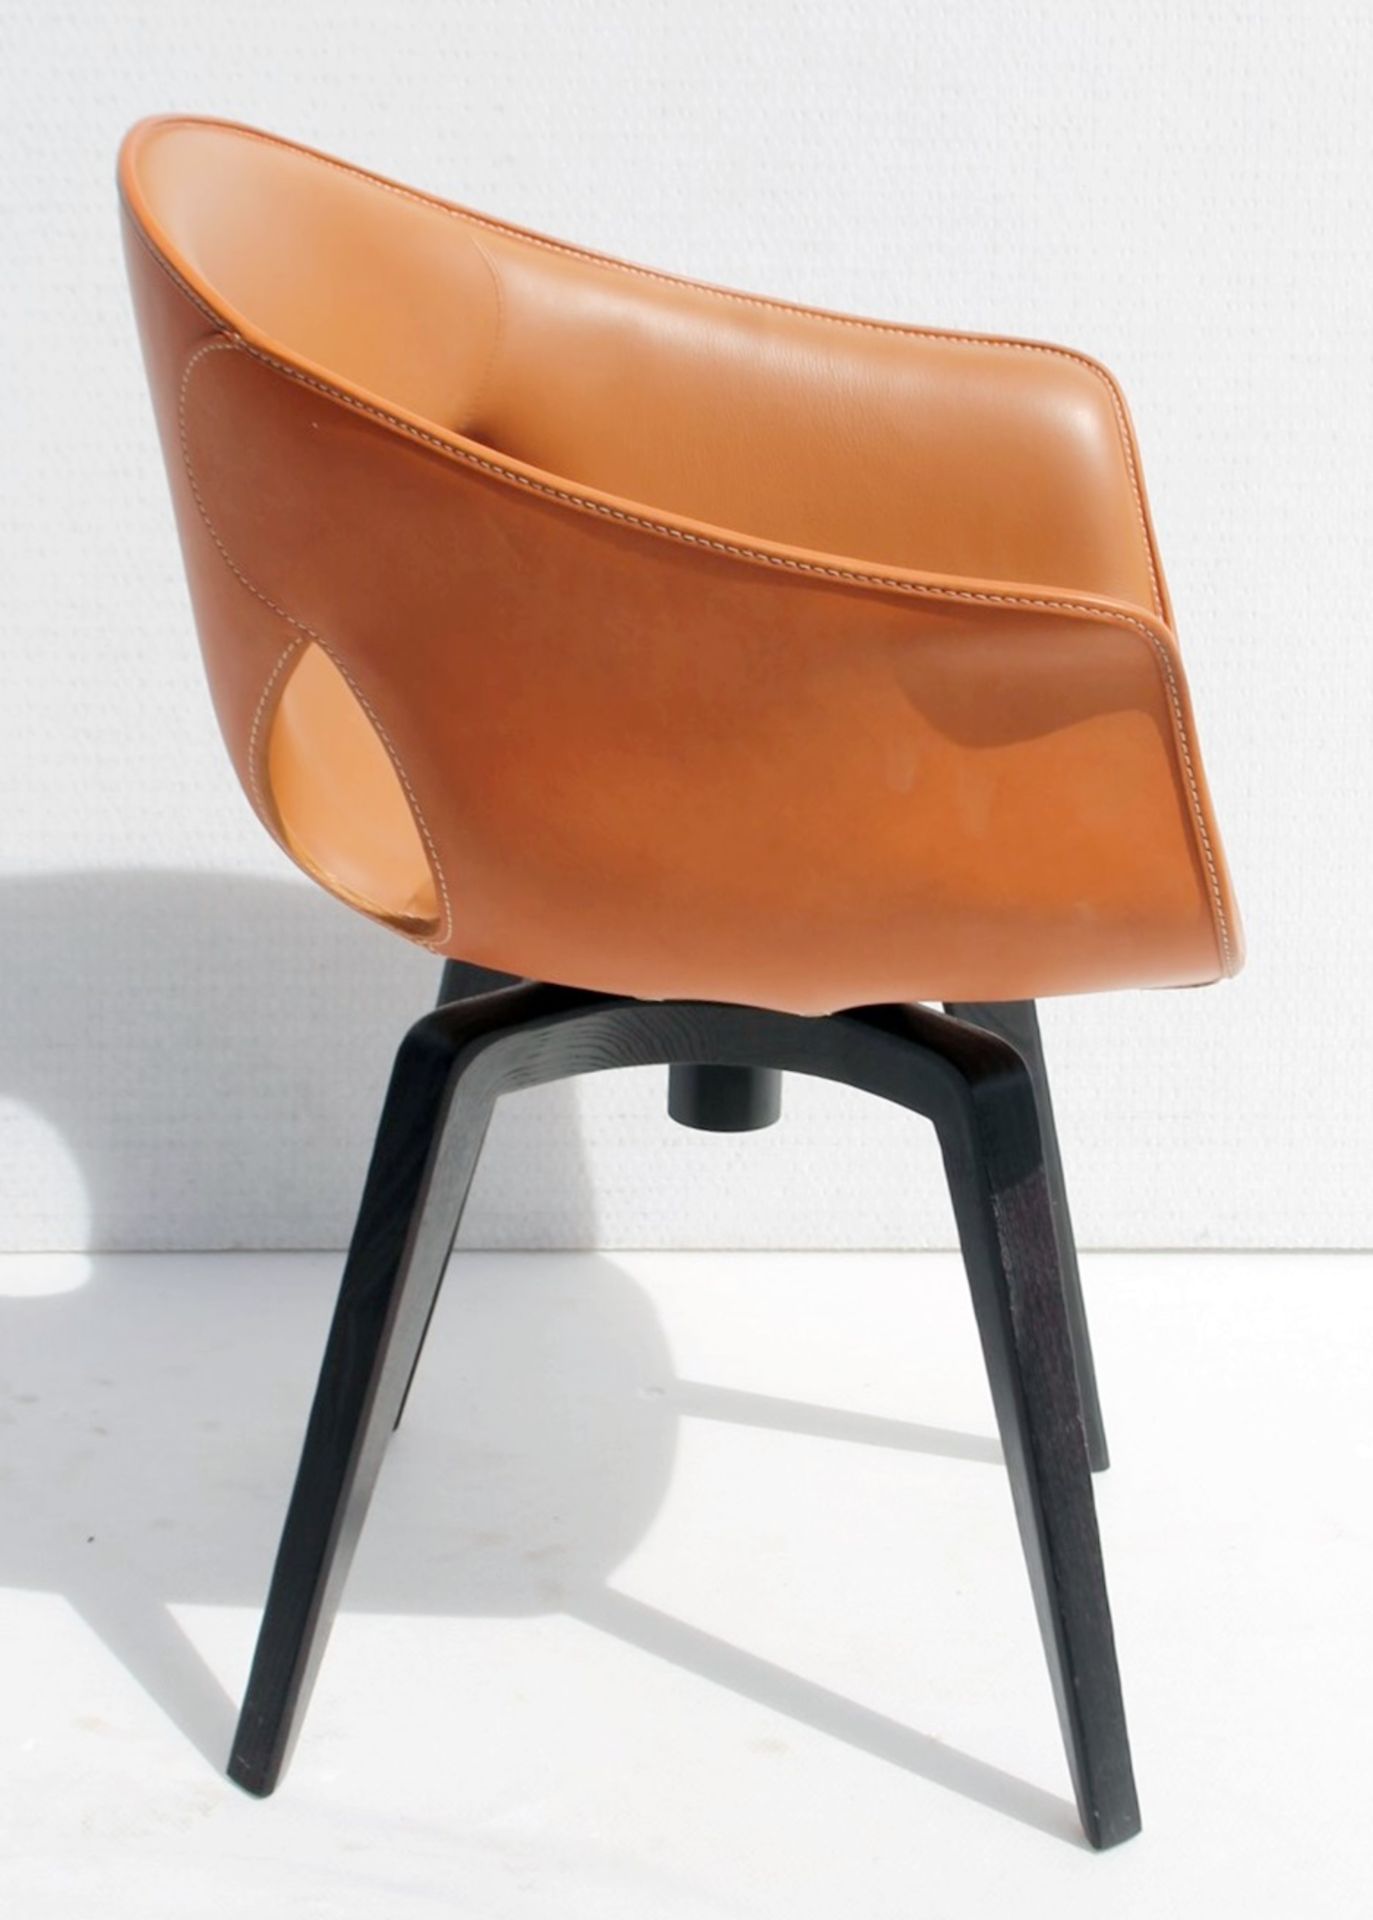 1 x POLTRONA FRAU 'Ginger' Designer Leather Swivel Chair In Bespoke Colours - Original Price £3,299 - Image 4 of 9